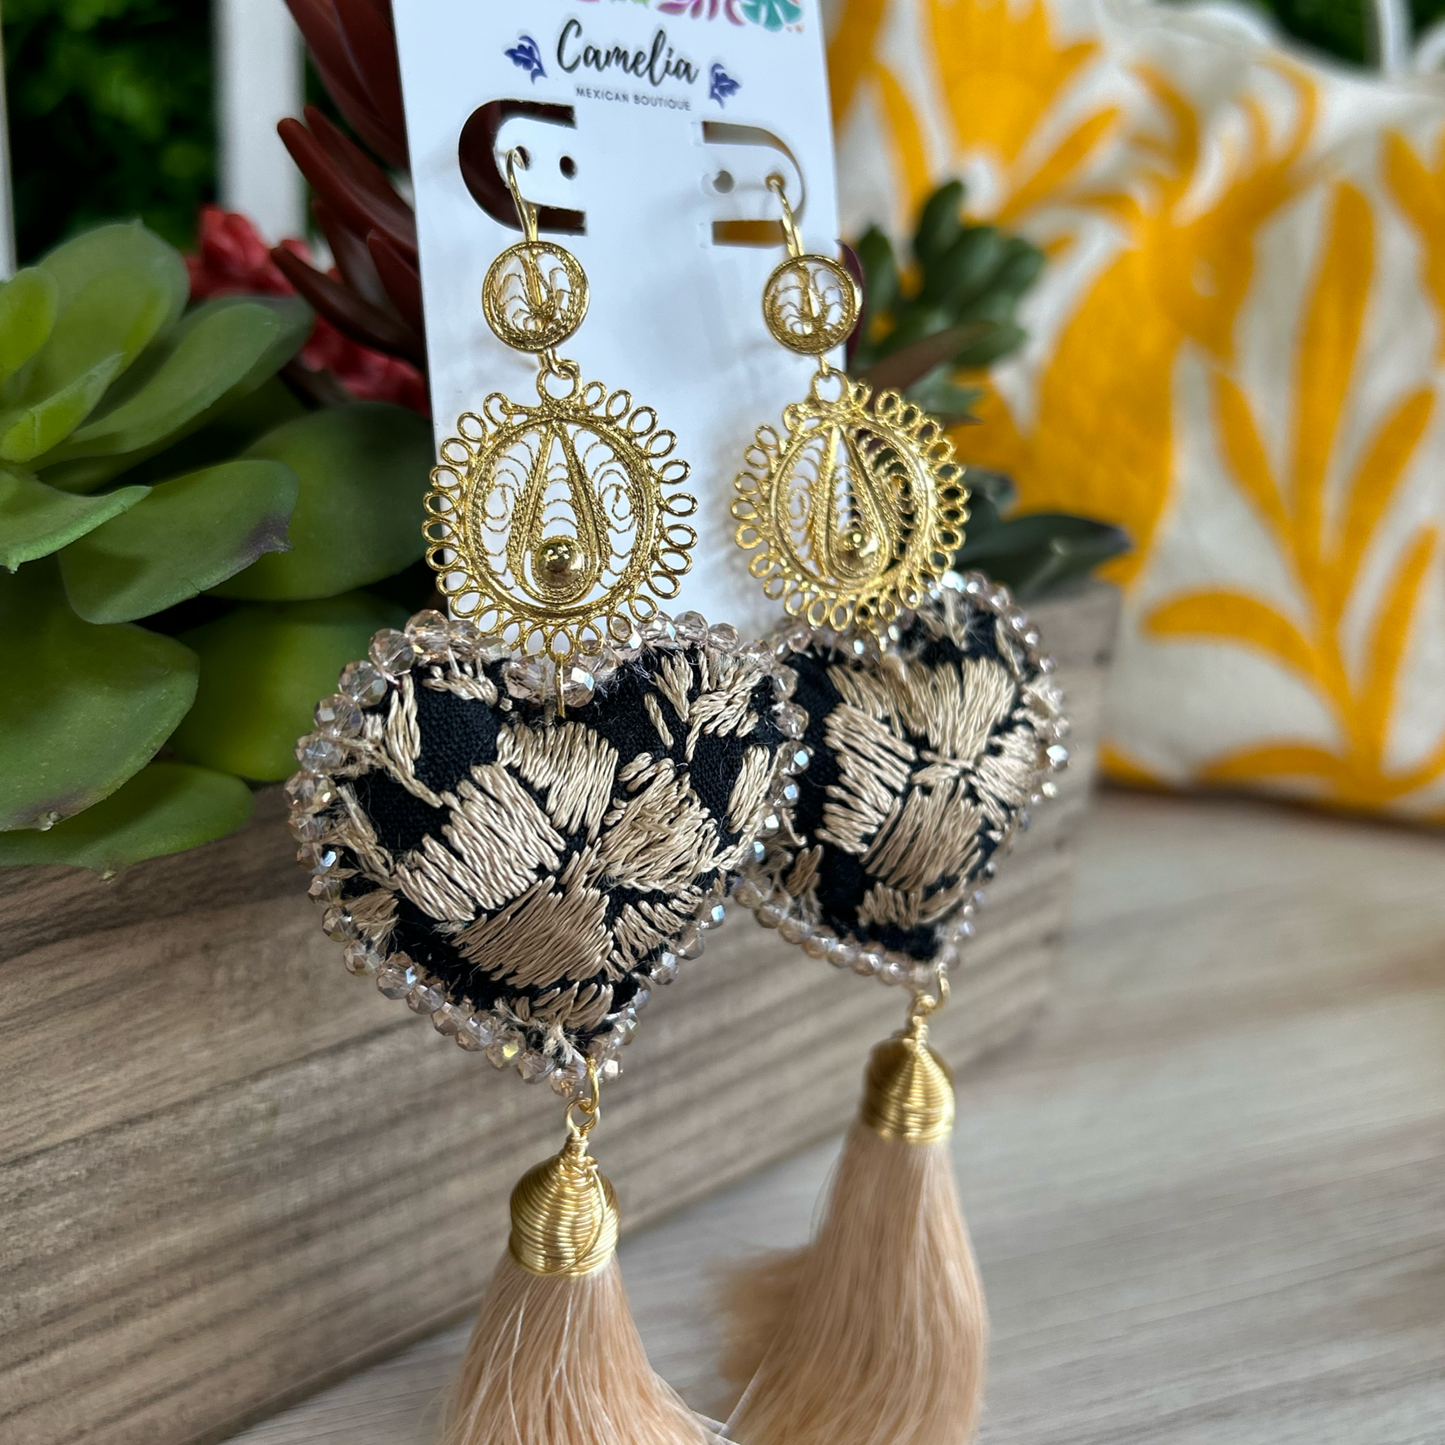 San Antonino Mexican Embroidered Heart Earrings - Golden Black